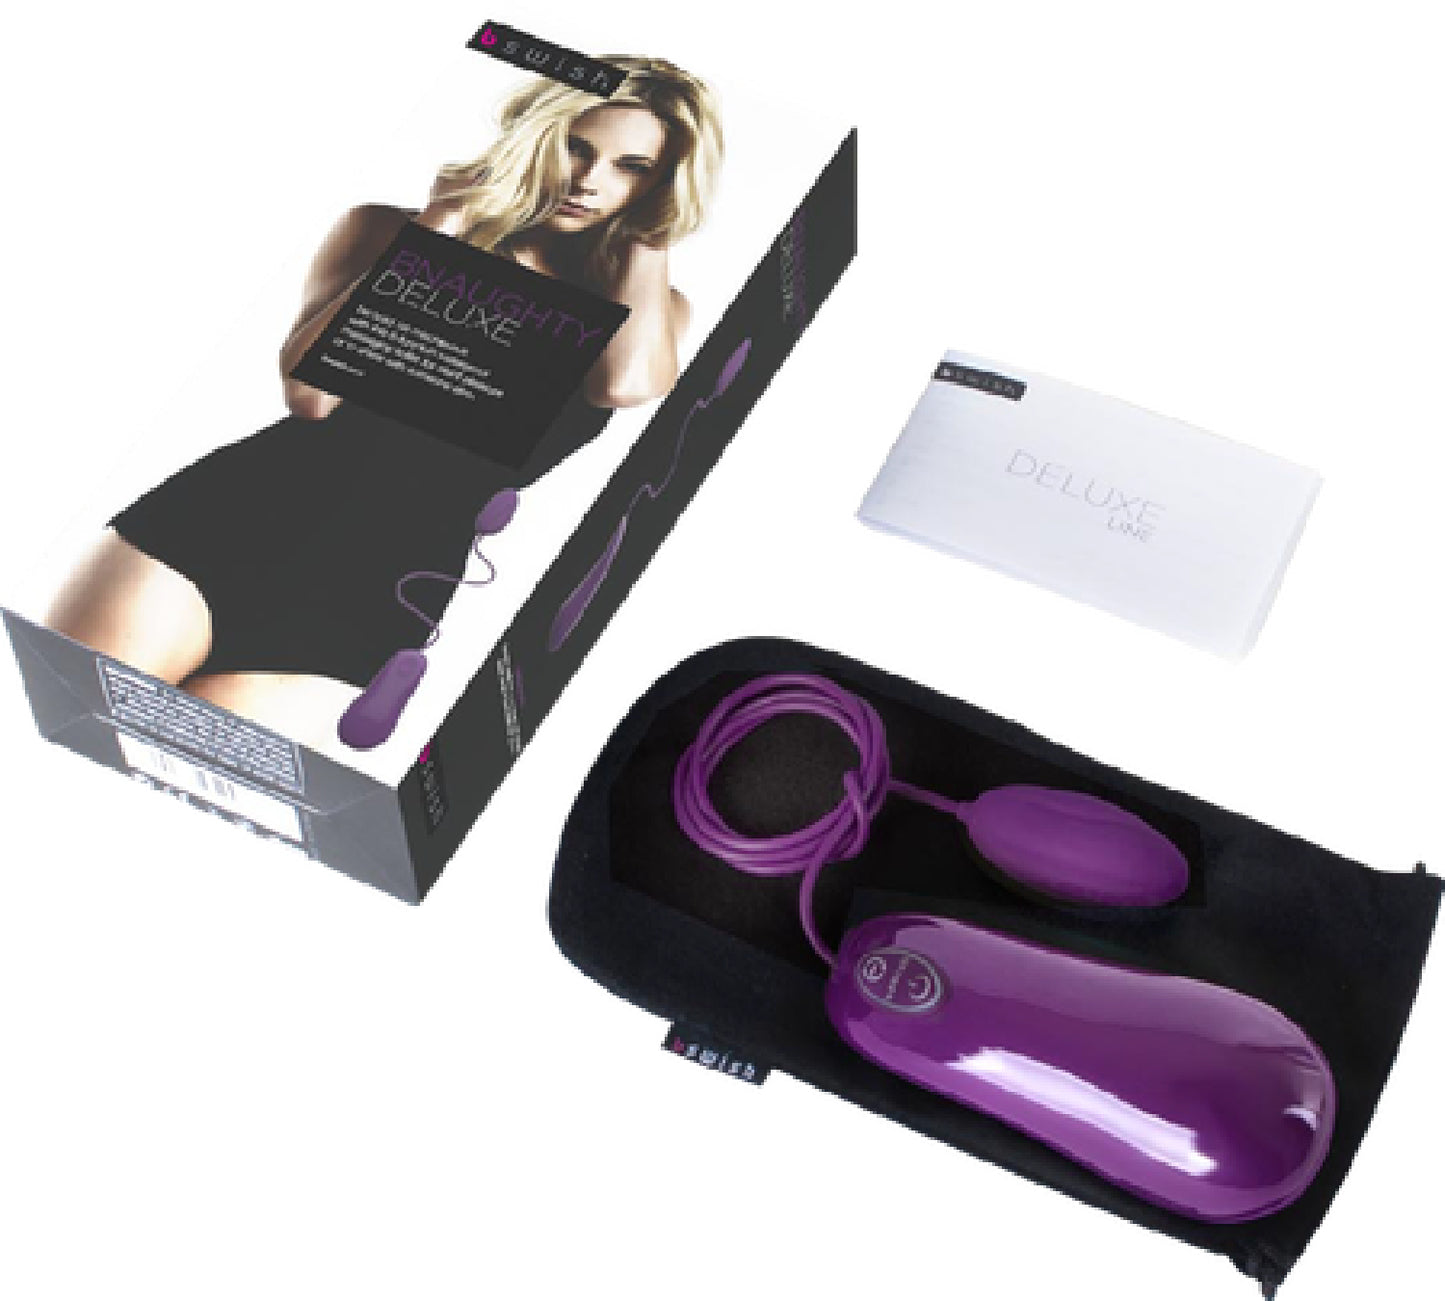 Bnaughty Deluxe (Royal Purple) - One Stop Adult Shop